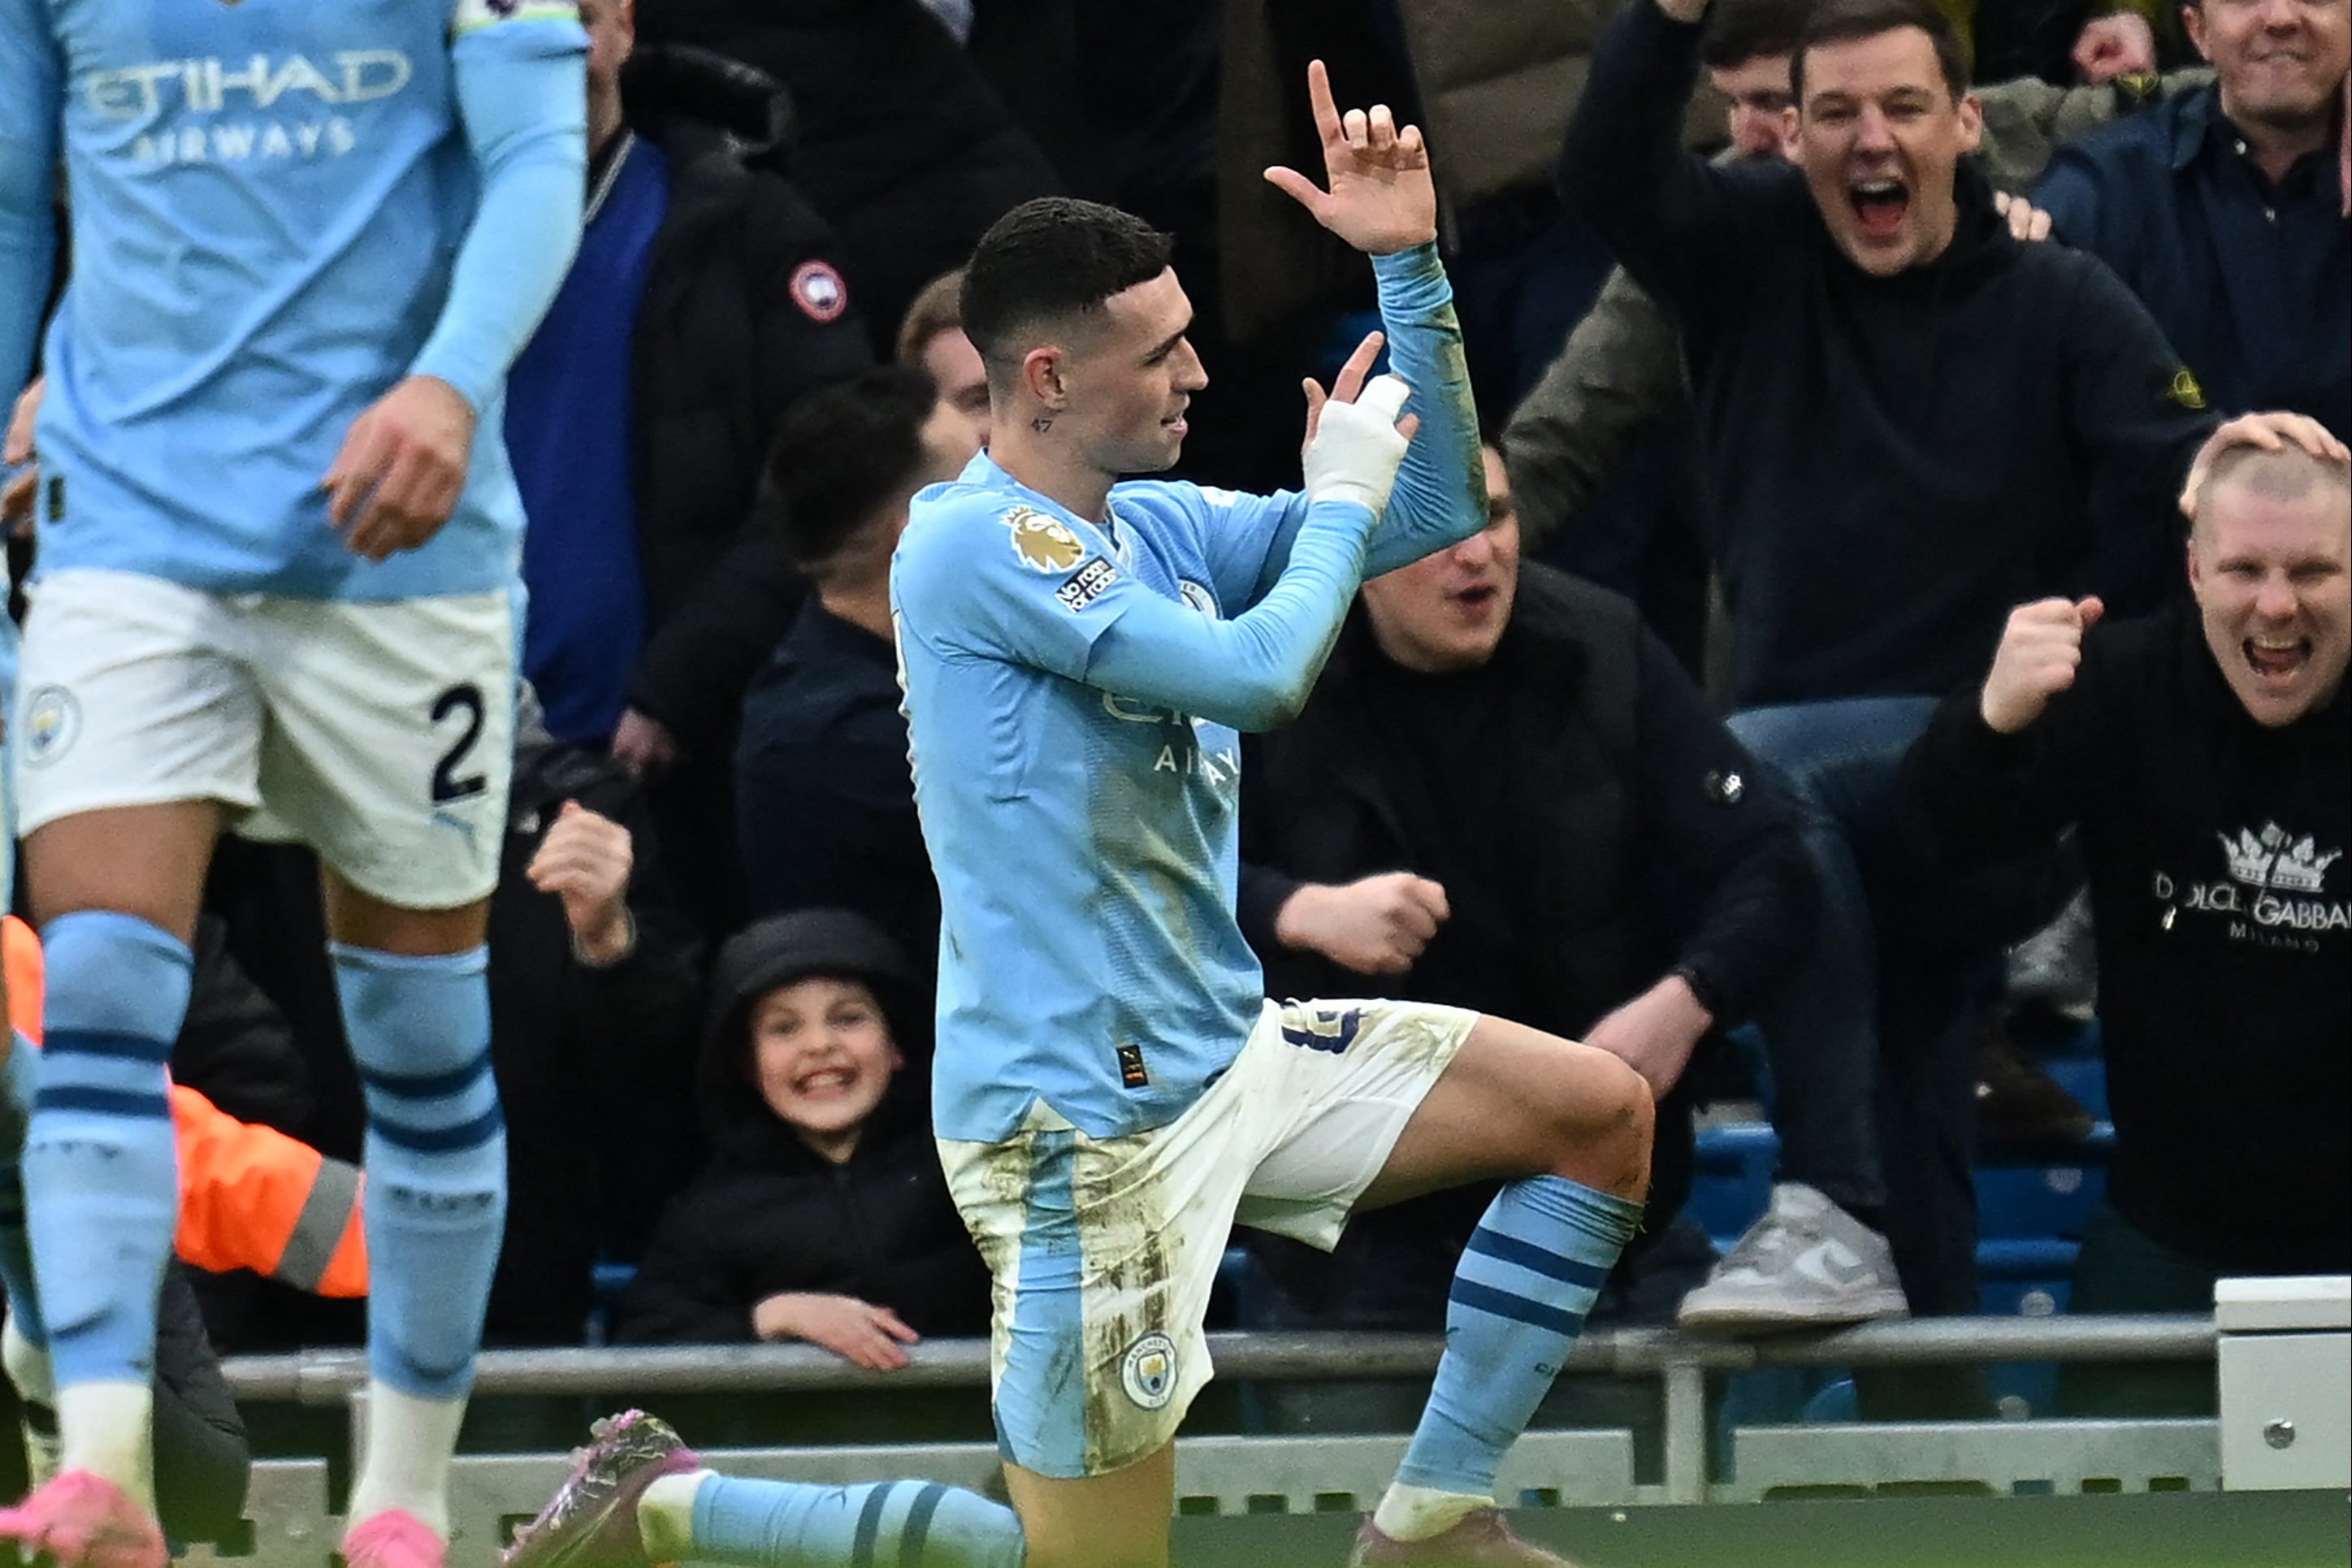 Phil Foden scored two superb goals as Man City came from behind to beat Man Utd 3-1